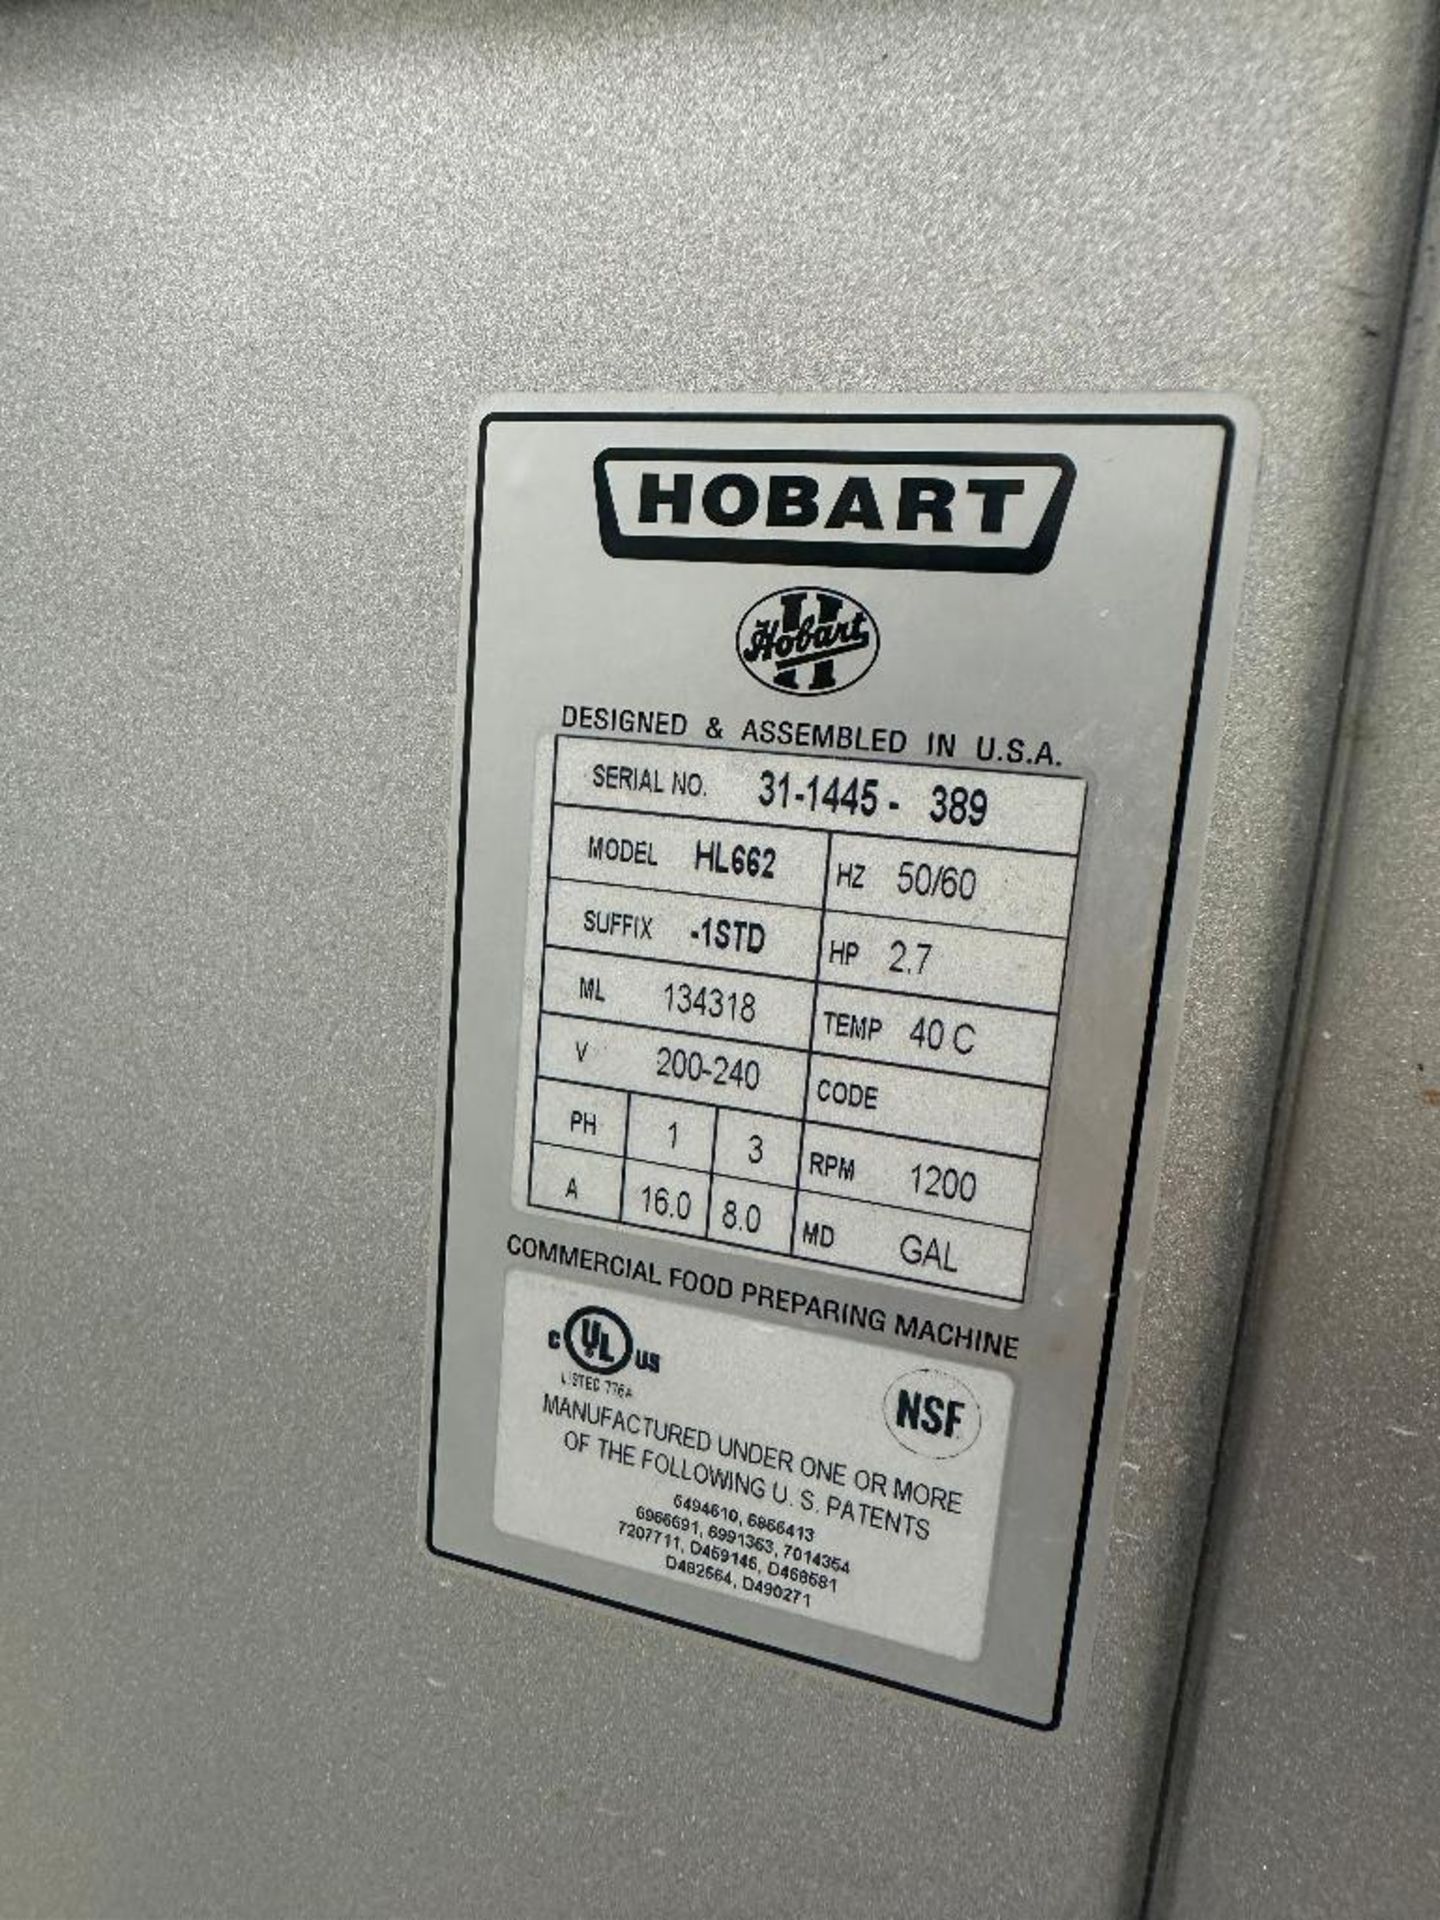 DESCRIPTION HOBART 60 QT LEGACY MIXER W/ BOWL, DOLLY, PADDLE, AND HOOK. RETAIL NEW FOR $26K BRAND / - Image 6 of 6